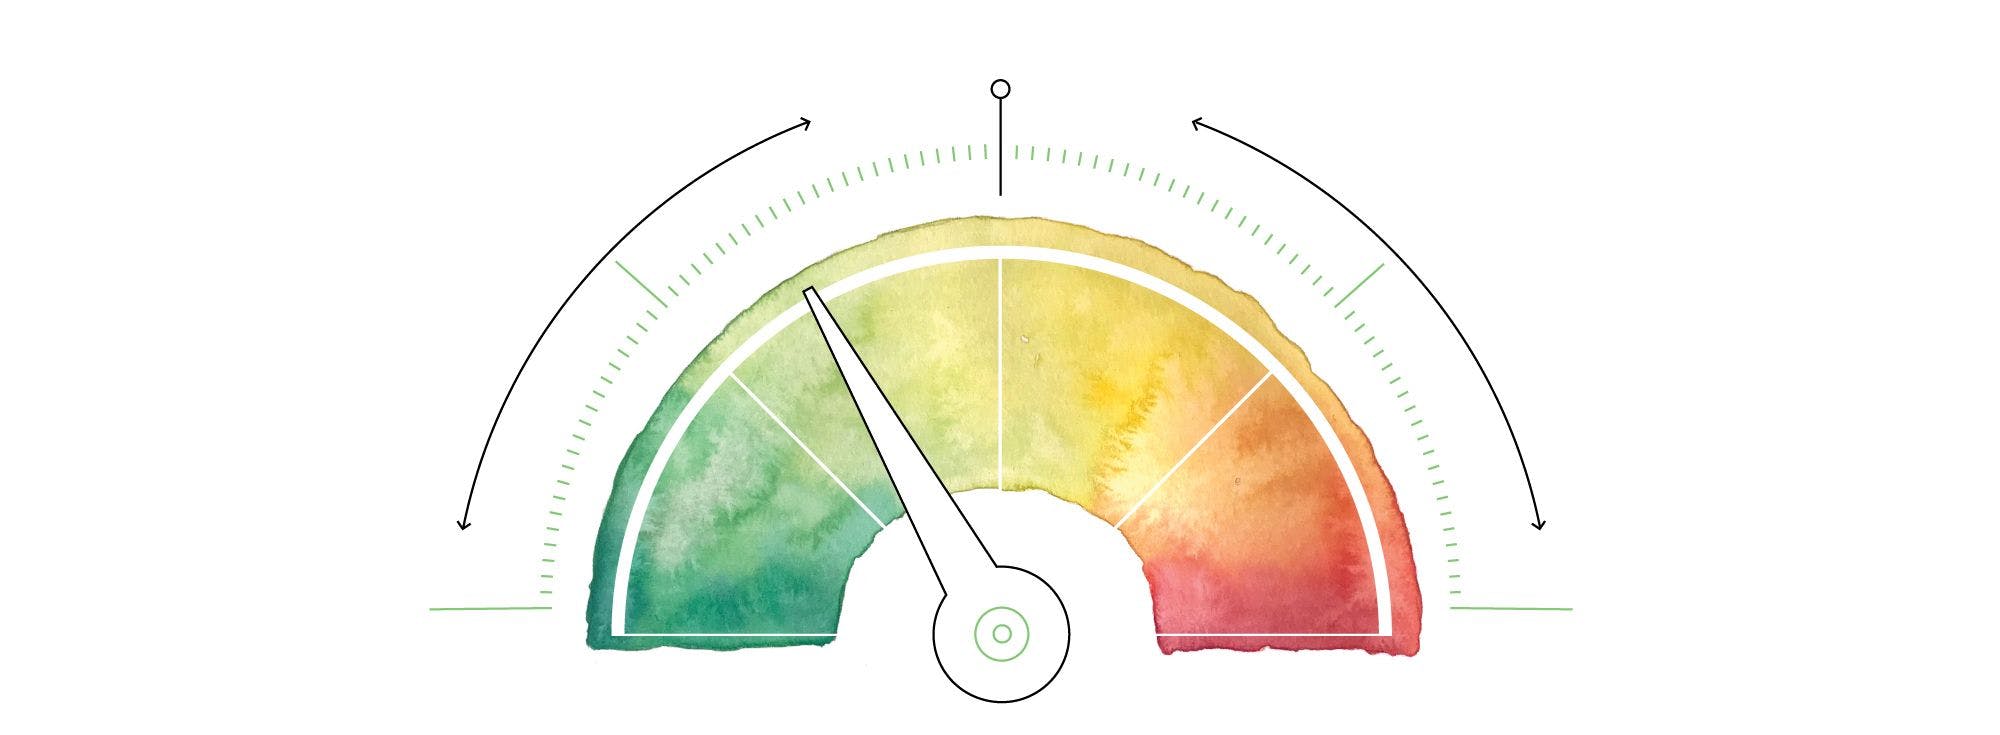 Watercolor-style gauge from green to yellow to red with a needle pointing at light green